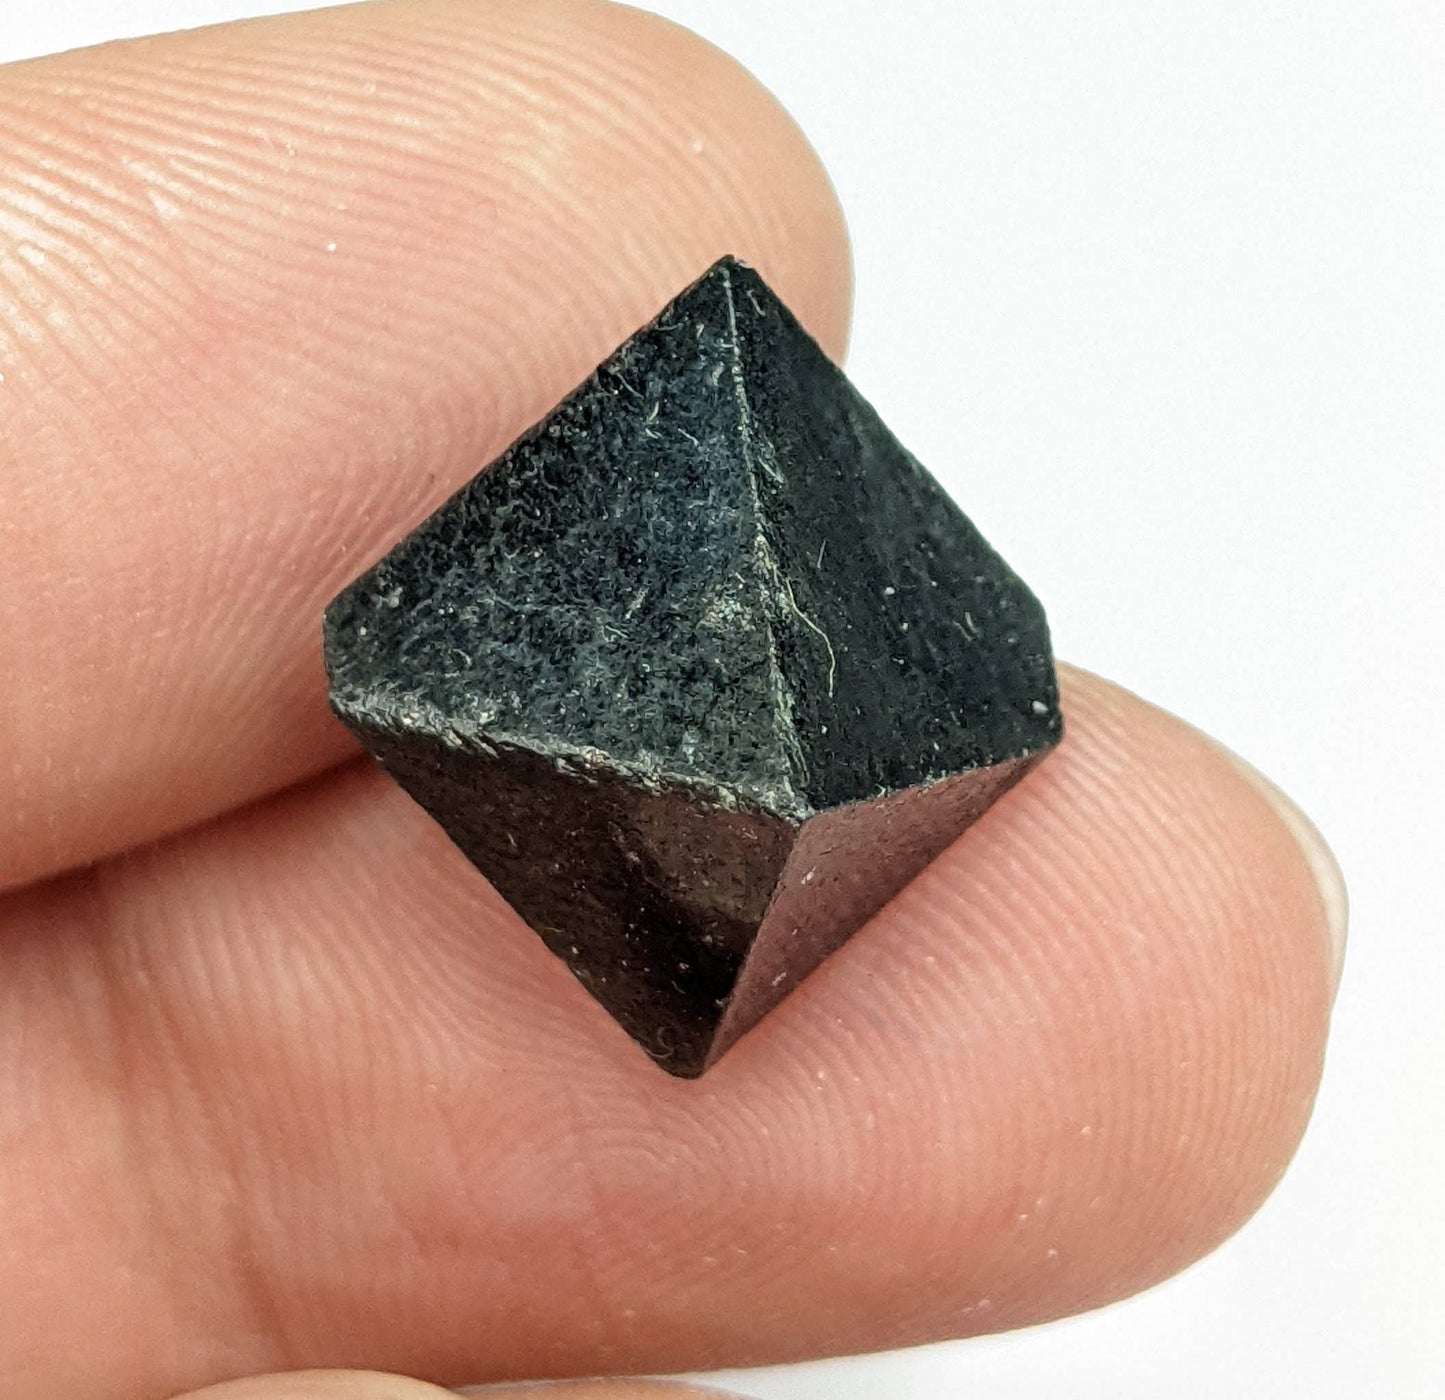 ARSAA GEMS AND MINERALSSmall lot of Black Magnetite crystal with octahedral structure from Skardu Gilgit Baltistan Pakistan, 12 grams - Premium  from ARSAA GEMS AND MINERALS - Just $30.00! Shop now at ARSAA GEMS AND MINERALS